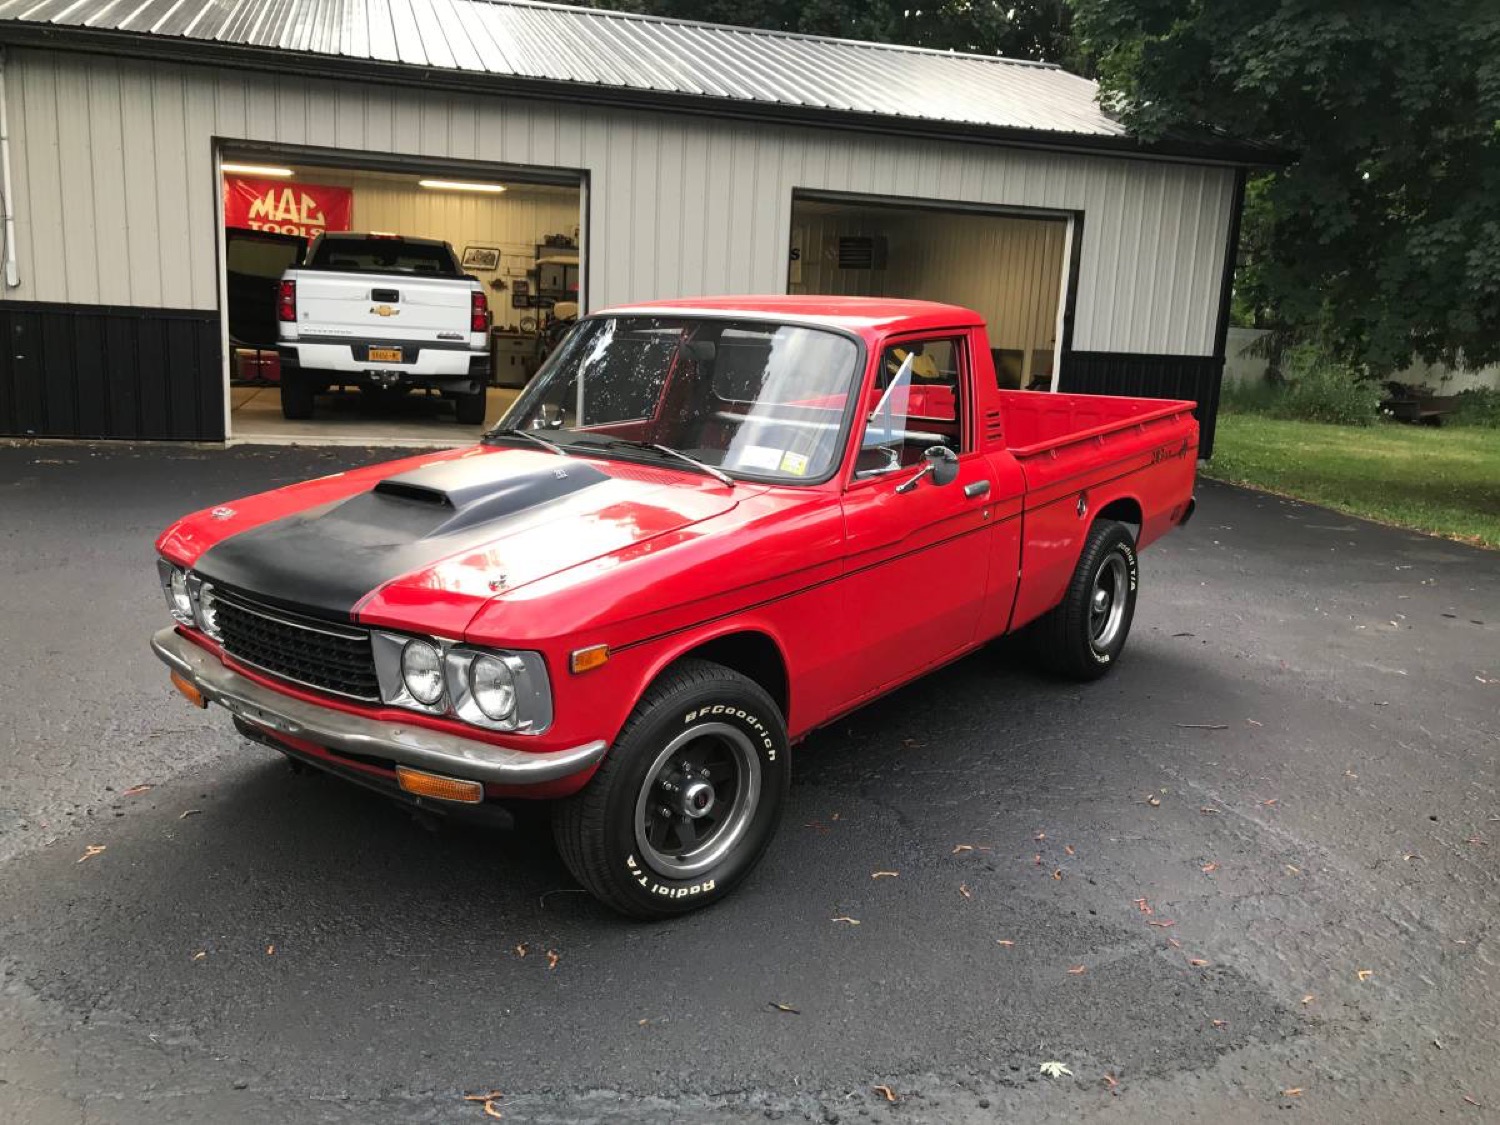 V8 Powered 1975 Chevy Luv Pickup For Sale Gm Authority